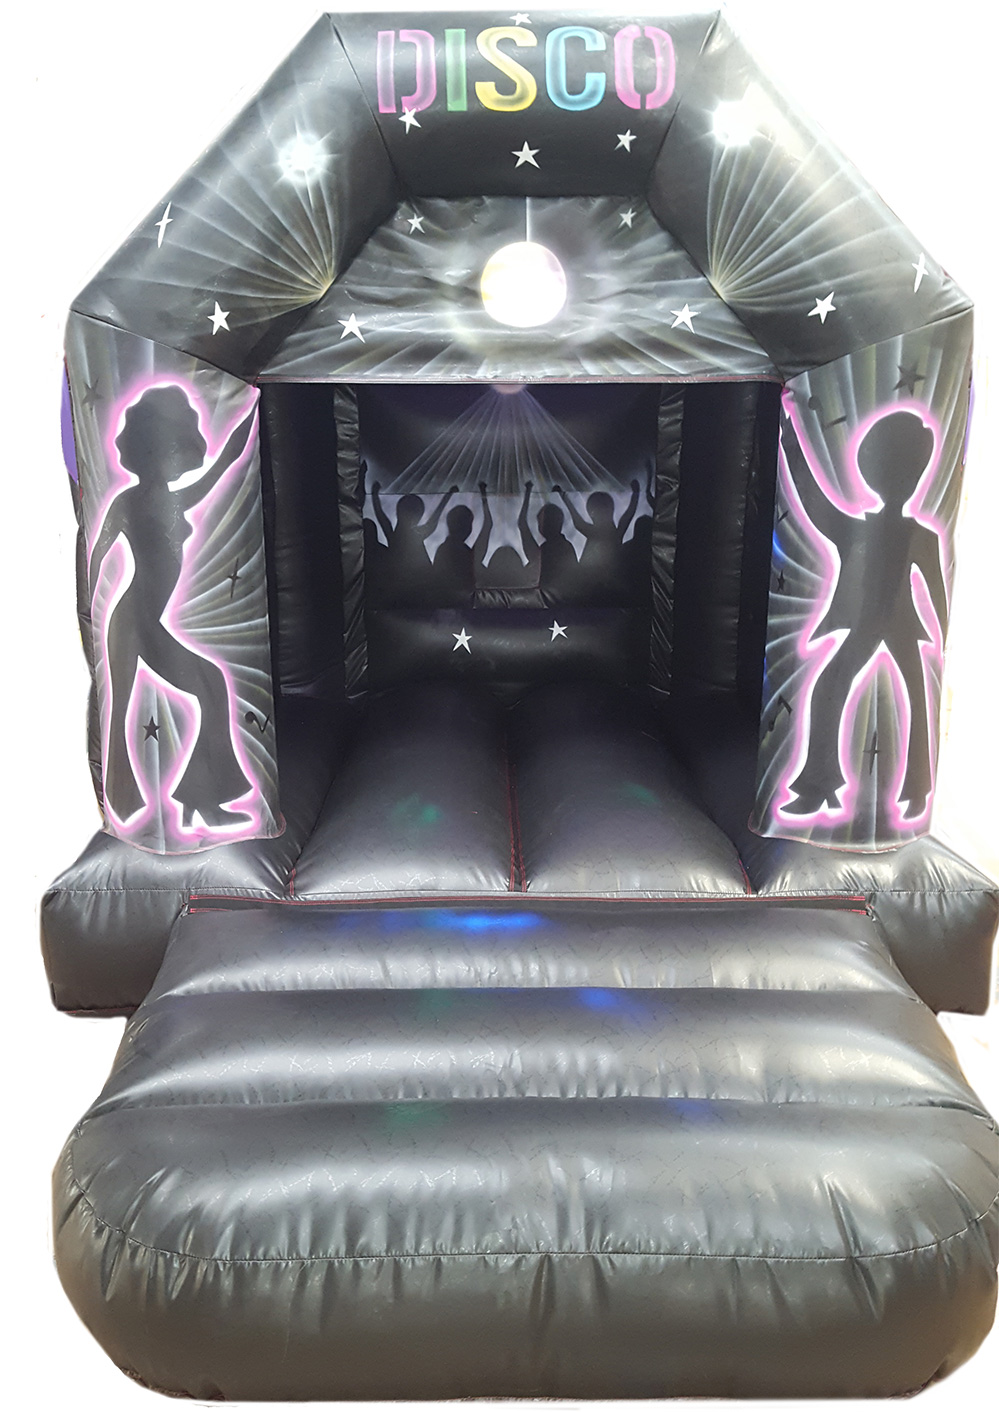 Bouncy Castle Sales - BC557 - Bouncy Inflatable for sale